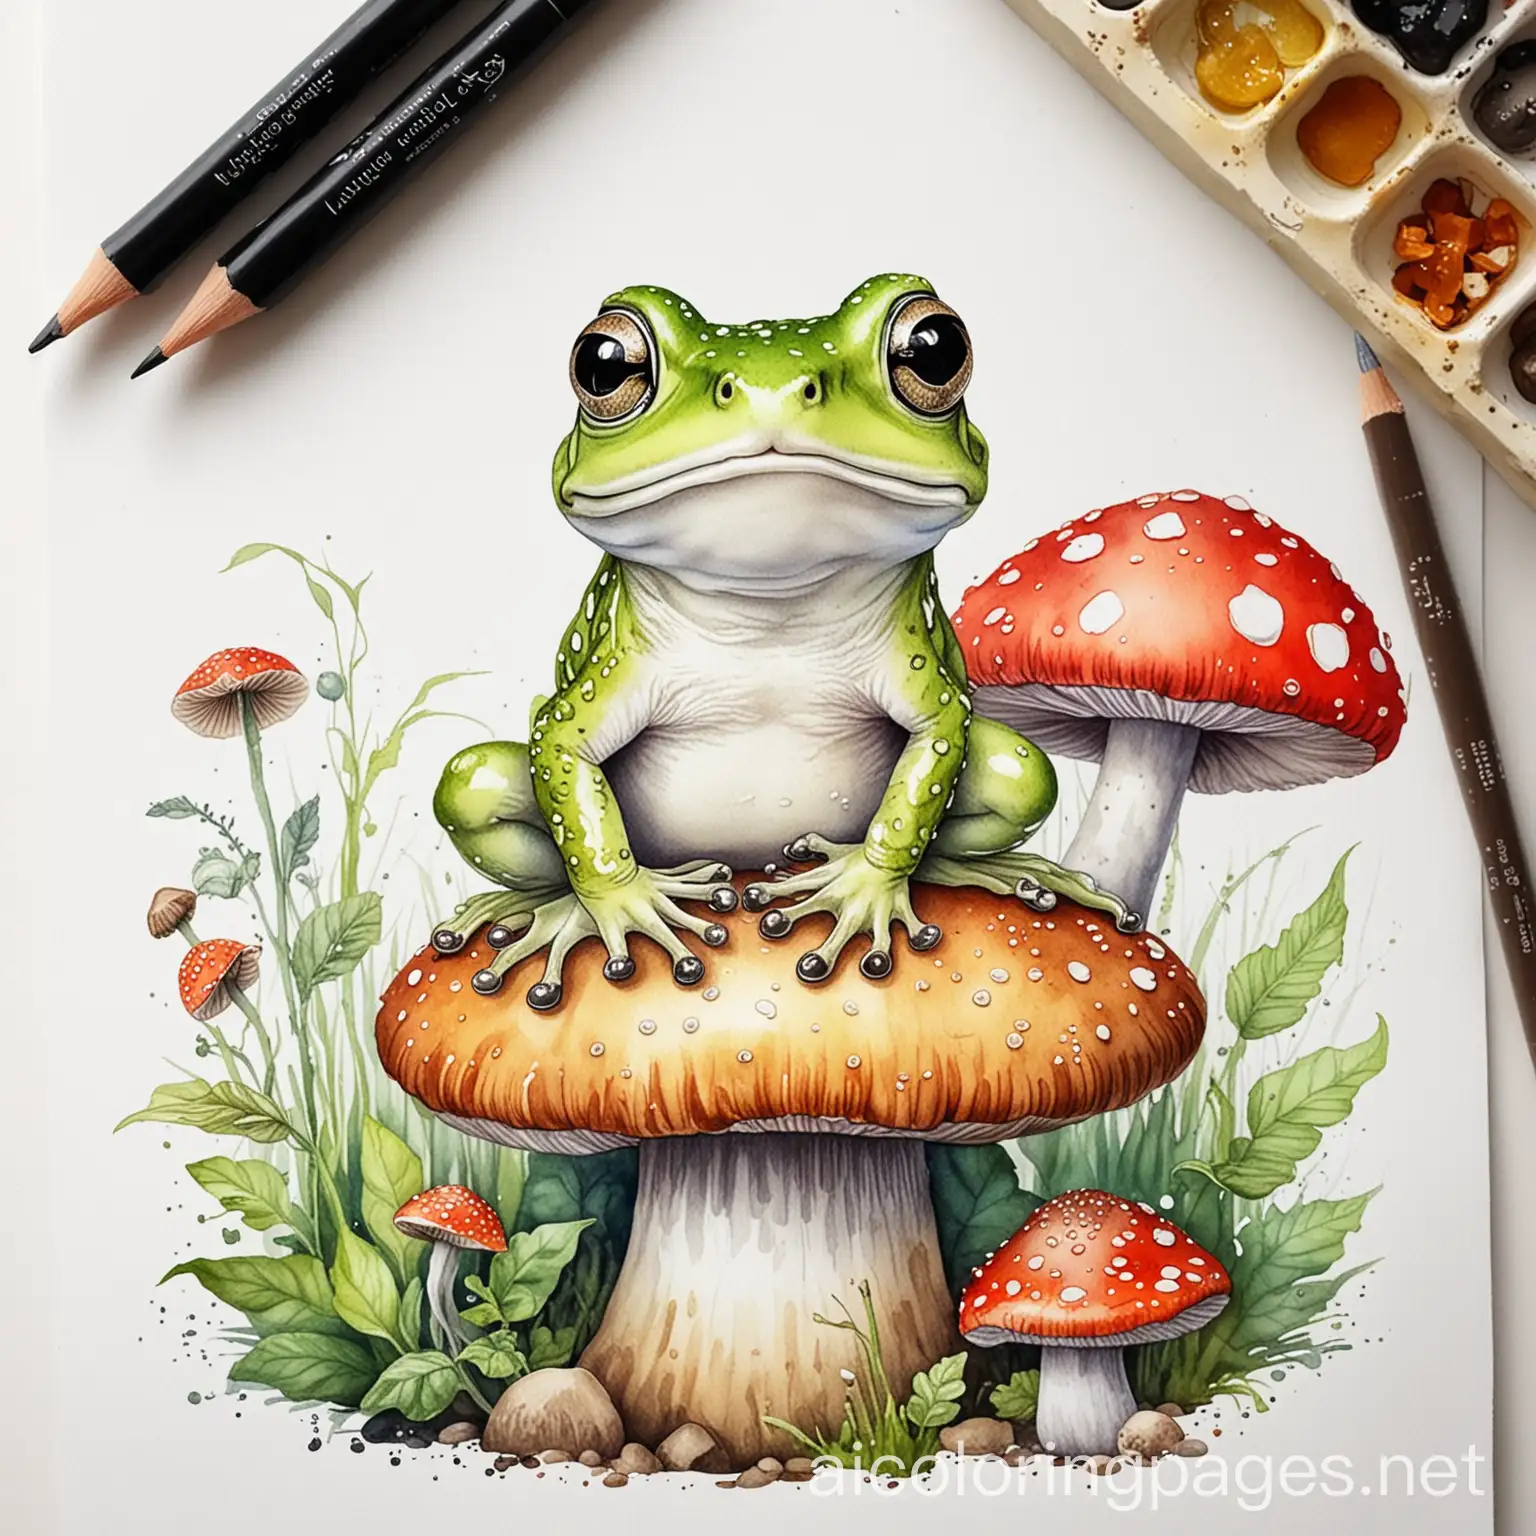 Cute Frog on Mushroom Watercolor Illustration, Coloring Page, black and white, line art, white background, Simplicity, Ample White Space. The background of the coloring page is plain white to make it easy for young children to color within the lines. The outlines of all the subjects are easy to distinguish, making it simple for kids to color without too much difficulty